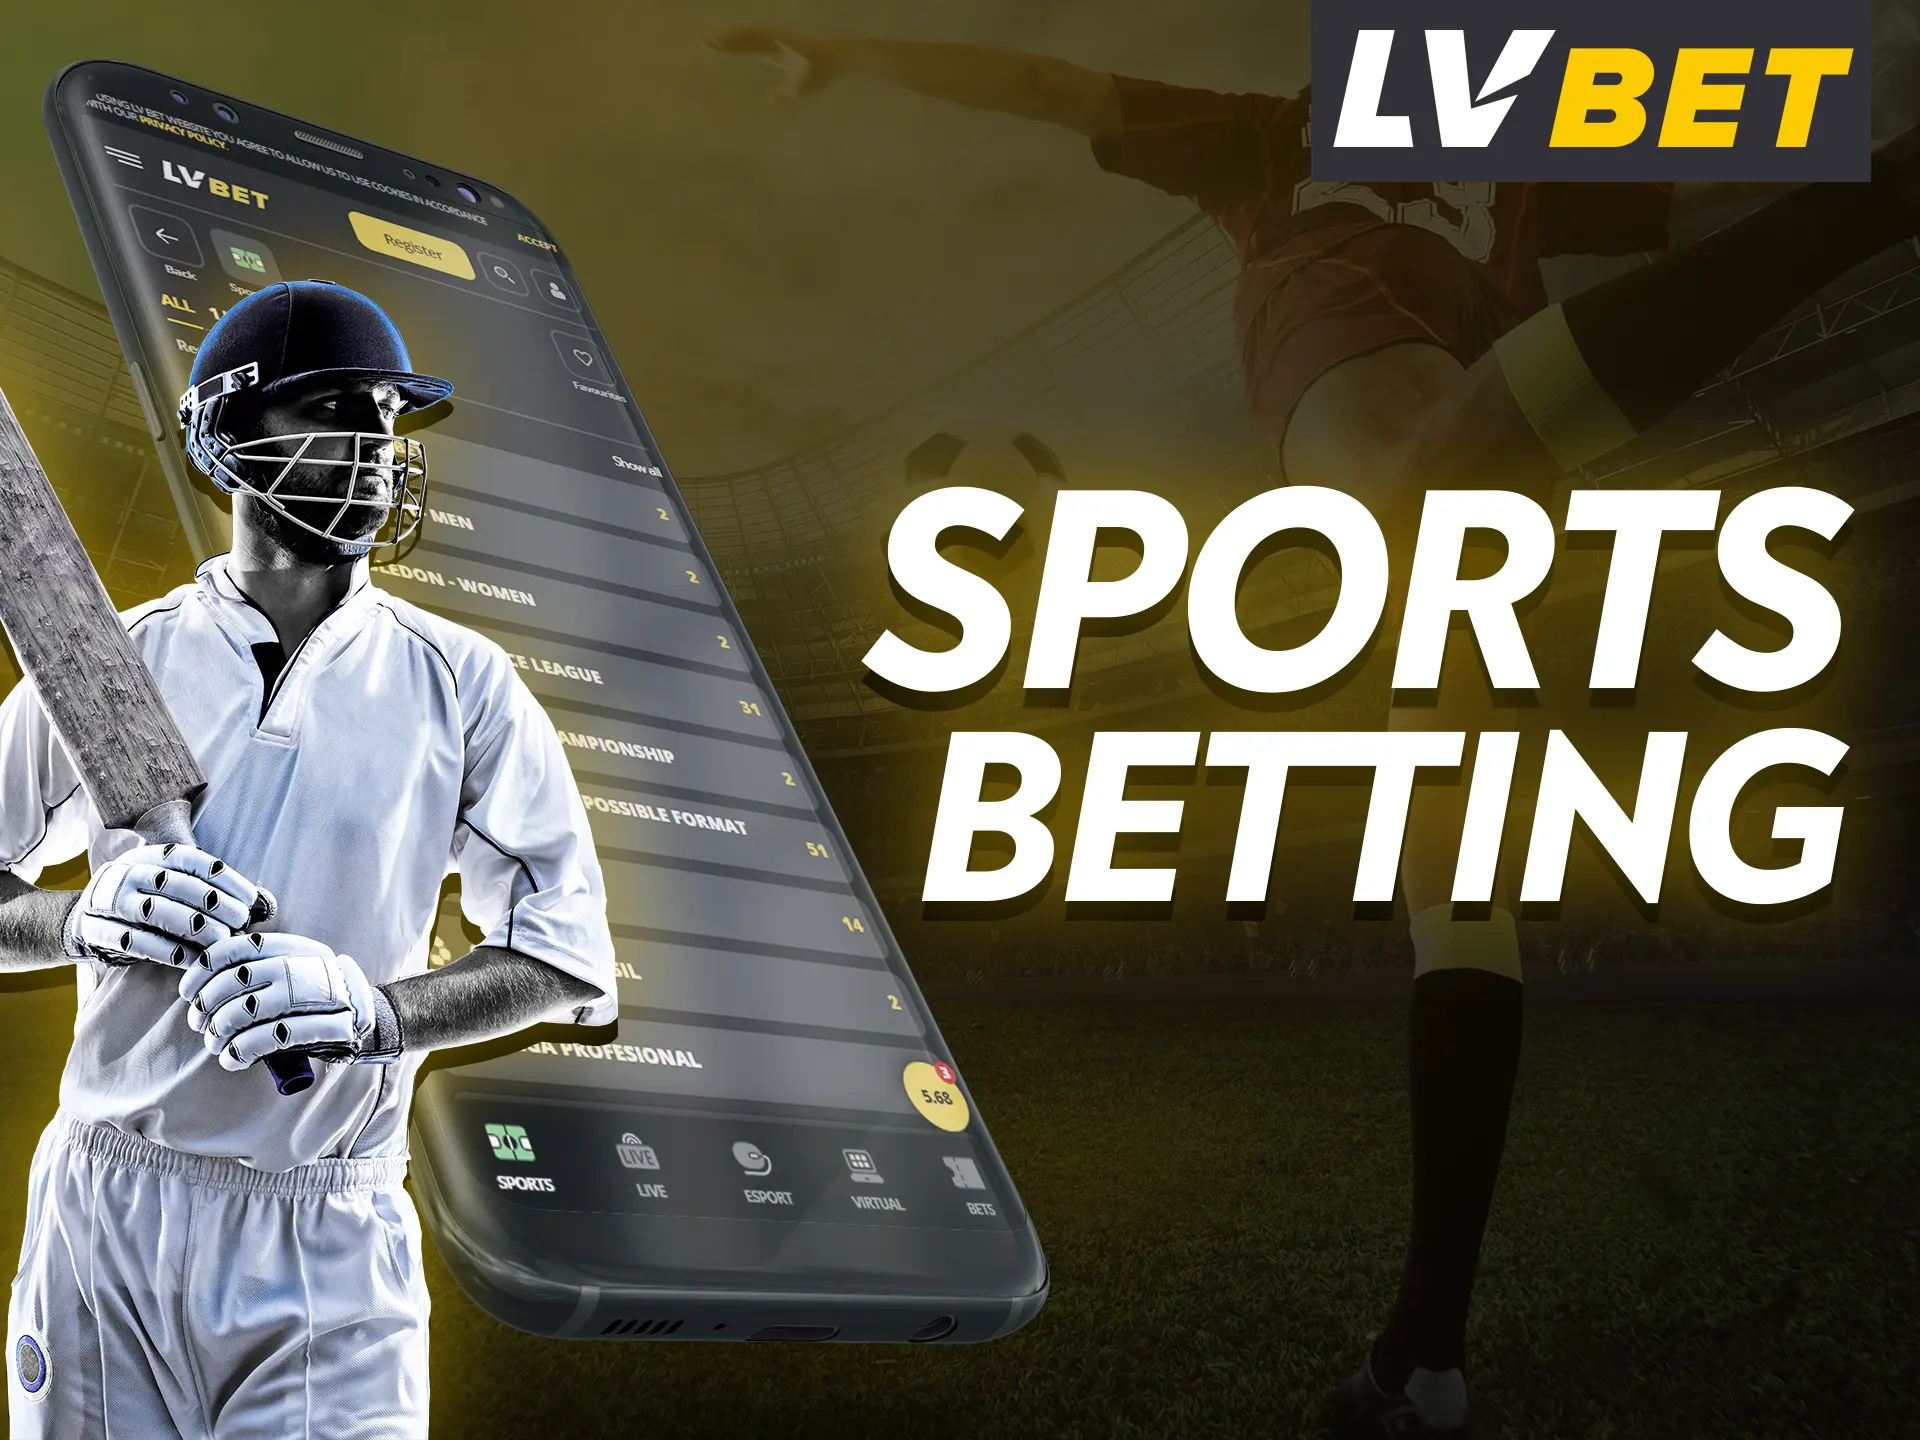 In the LV Bet app you can bet on any kind of sports.